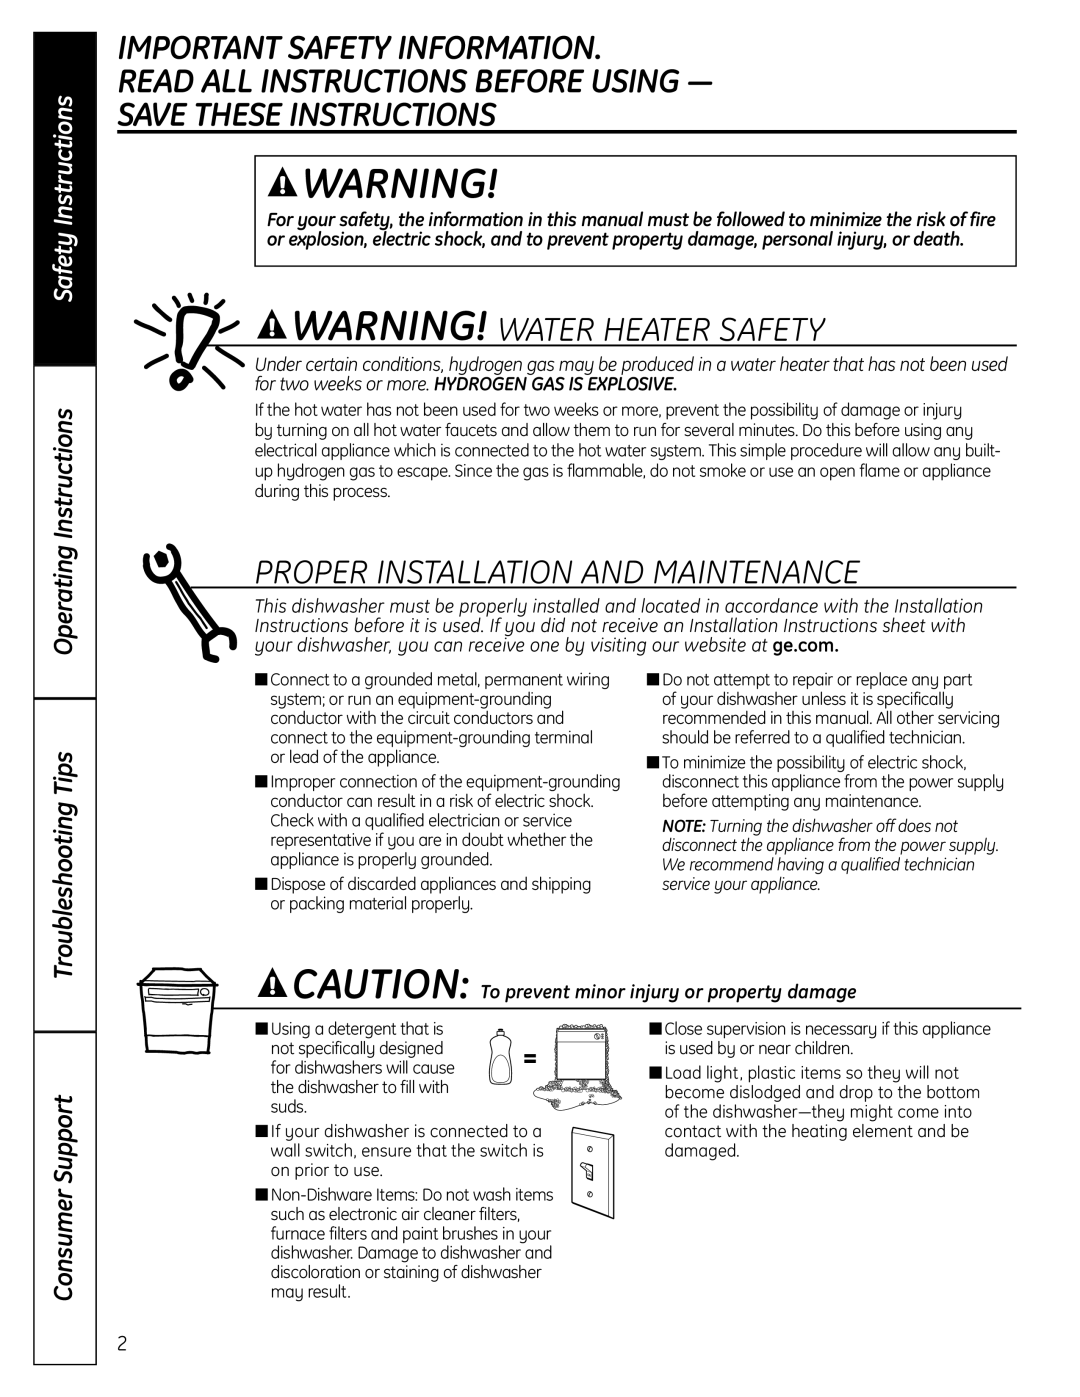 GE GLC4100 Important Safety Information, Read All Instructions Before Using, Save These Instructions, Safety Instructions 